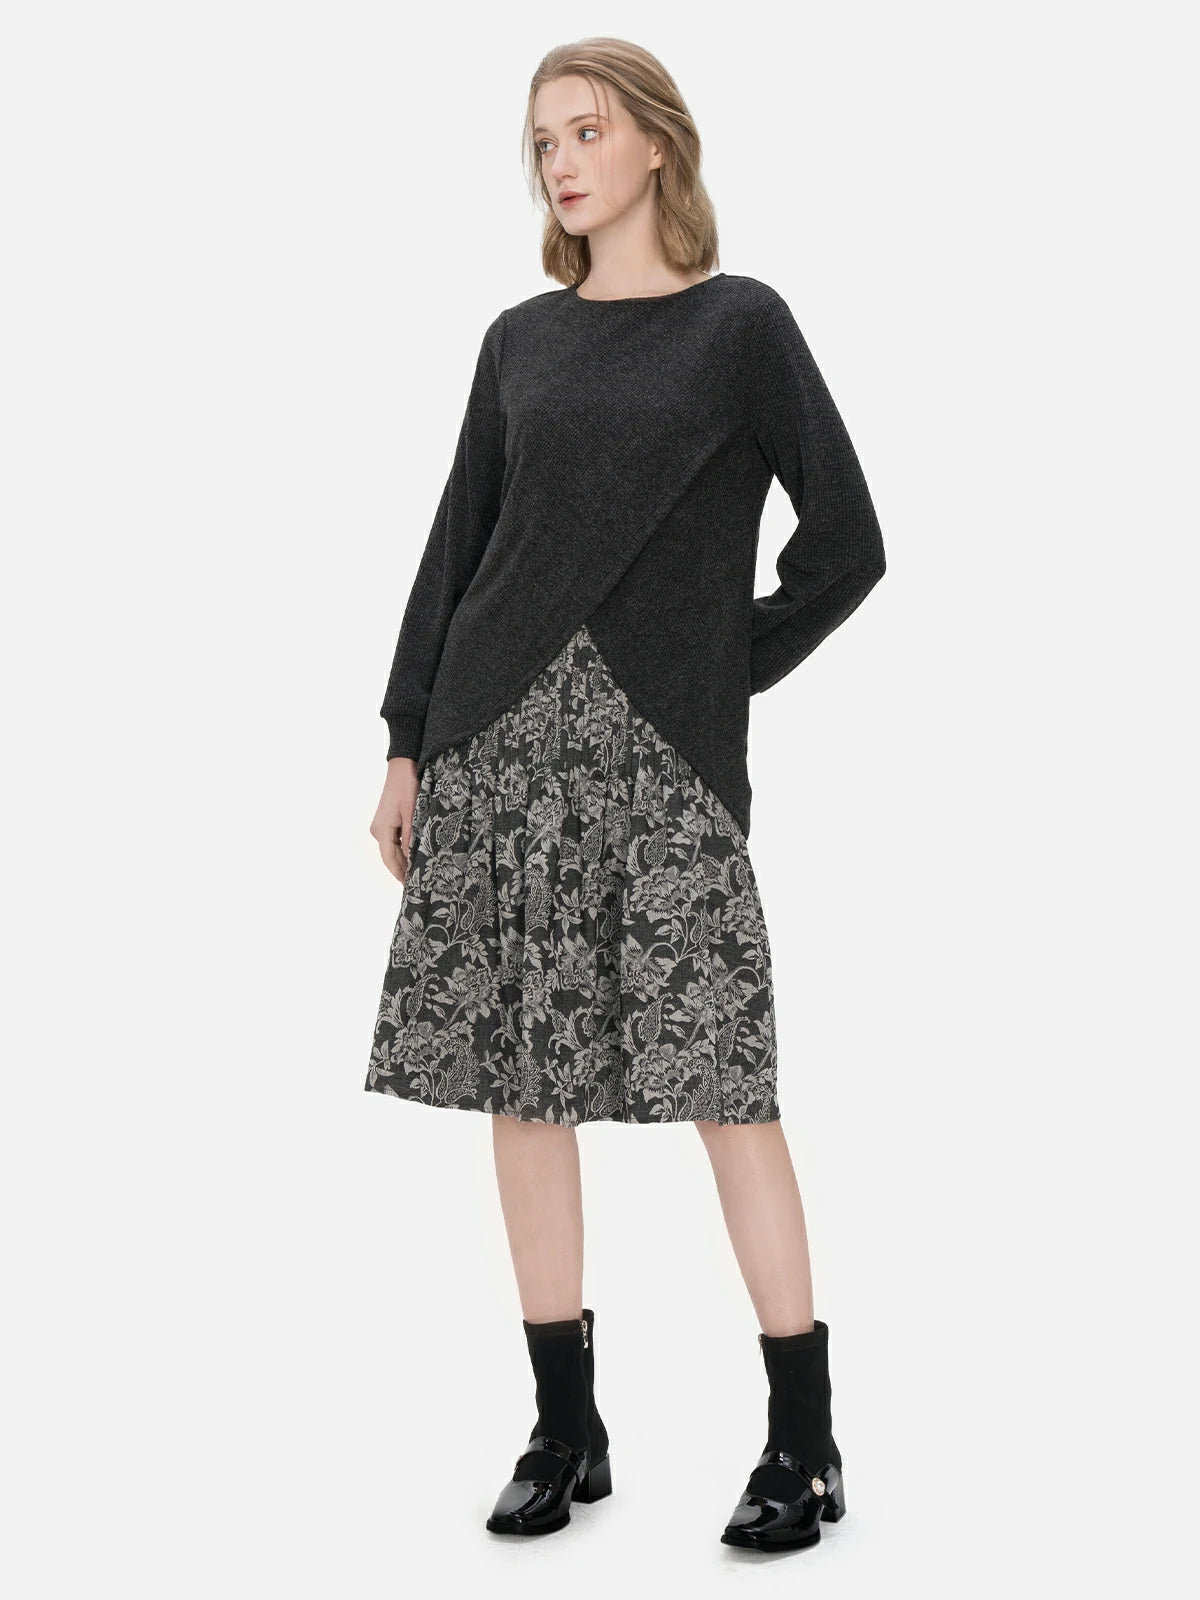 Achieve a confident and stylish look in this two-piece ensemble, consisting of a round-neck pullover sweater with an irregular hem and a sleeveless dress with a pleated floral print for a touch of elegance.